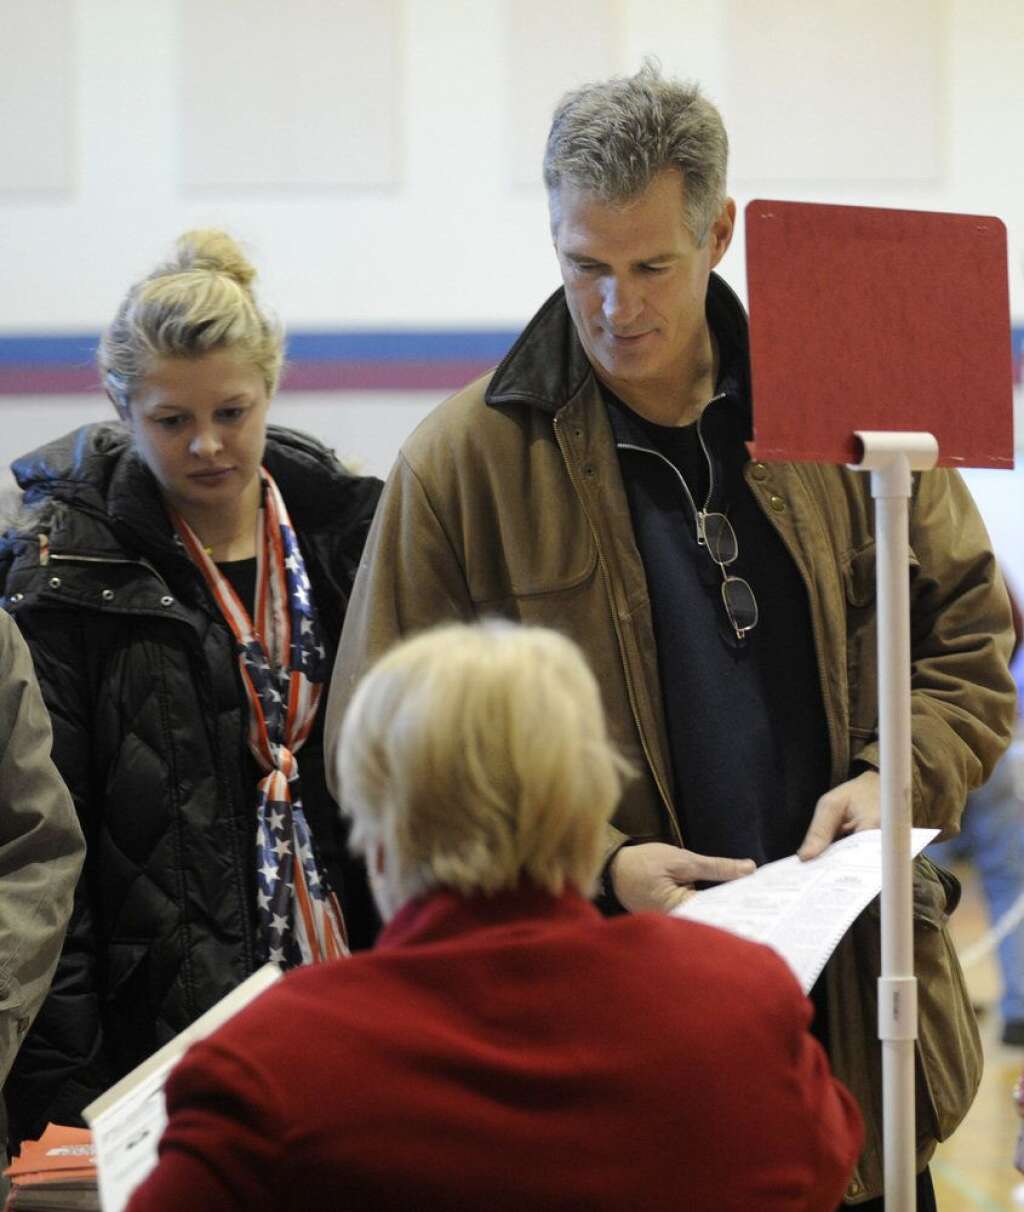 Scott Brown - U.S. Sen. Scott Brown, R-Mass., picks up his ballot with his daughter Arianna, left, to cast his vote in Wrentham, Mass., on Election Day, Tuesday, Nov. 6, 2012. Brown is facing Democratic candidate Elizabeth Warren for the U.S. Senate. (AP Photo/Gretchen Ertl)